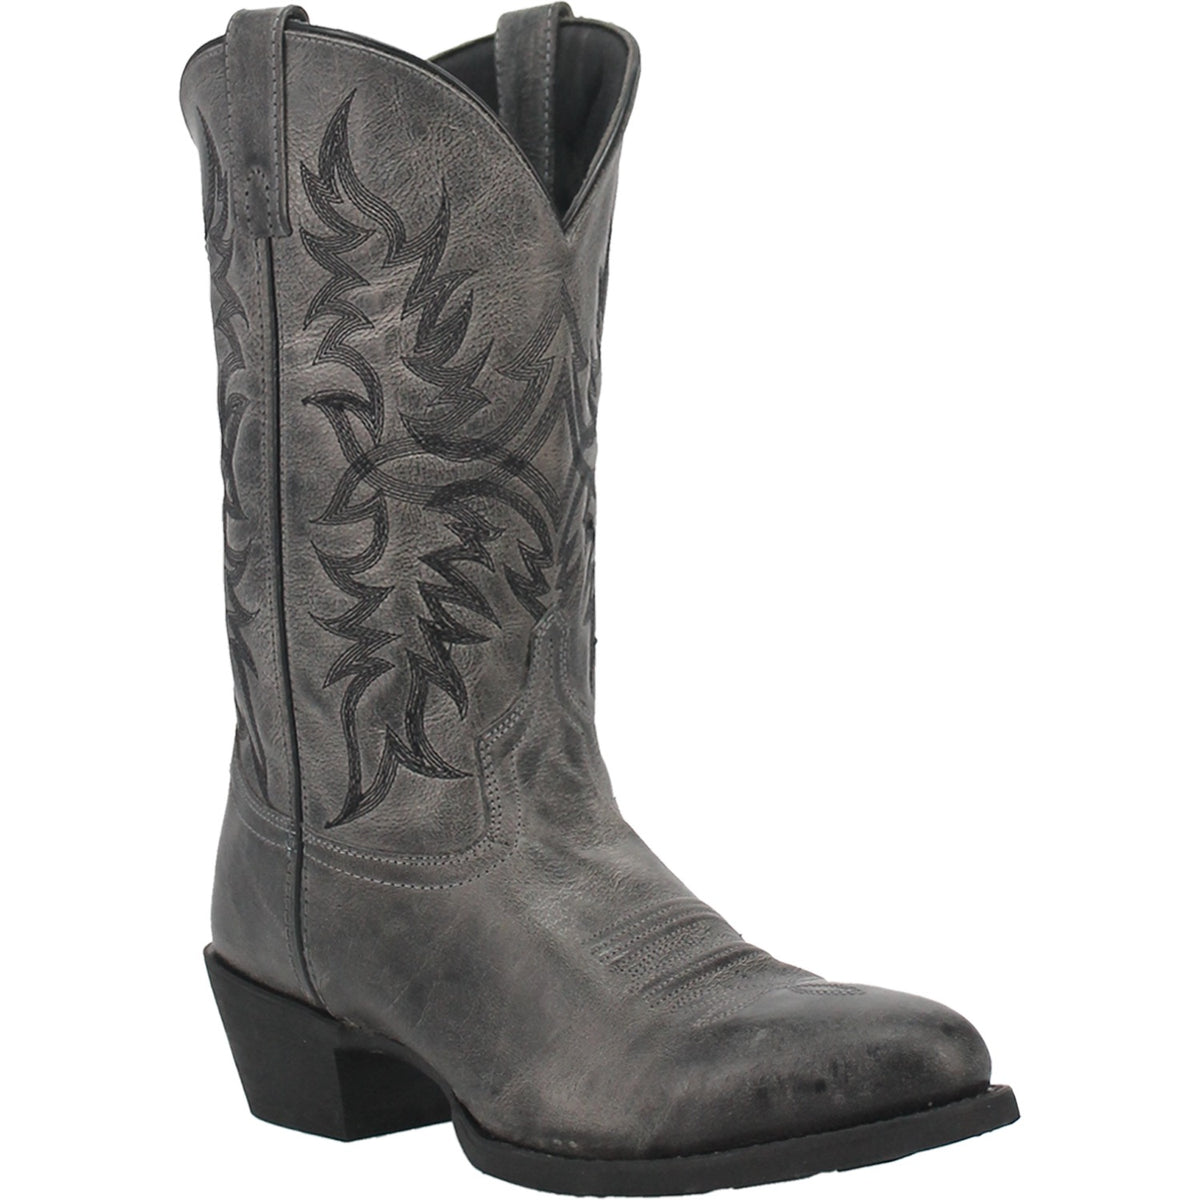 HARDING LEATHER BOOT Cover